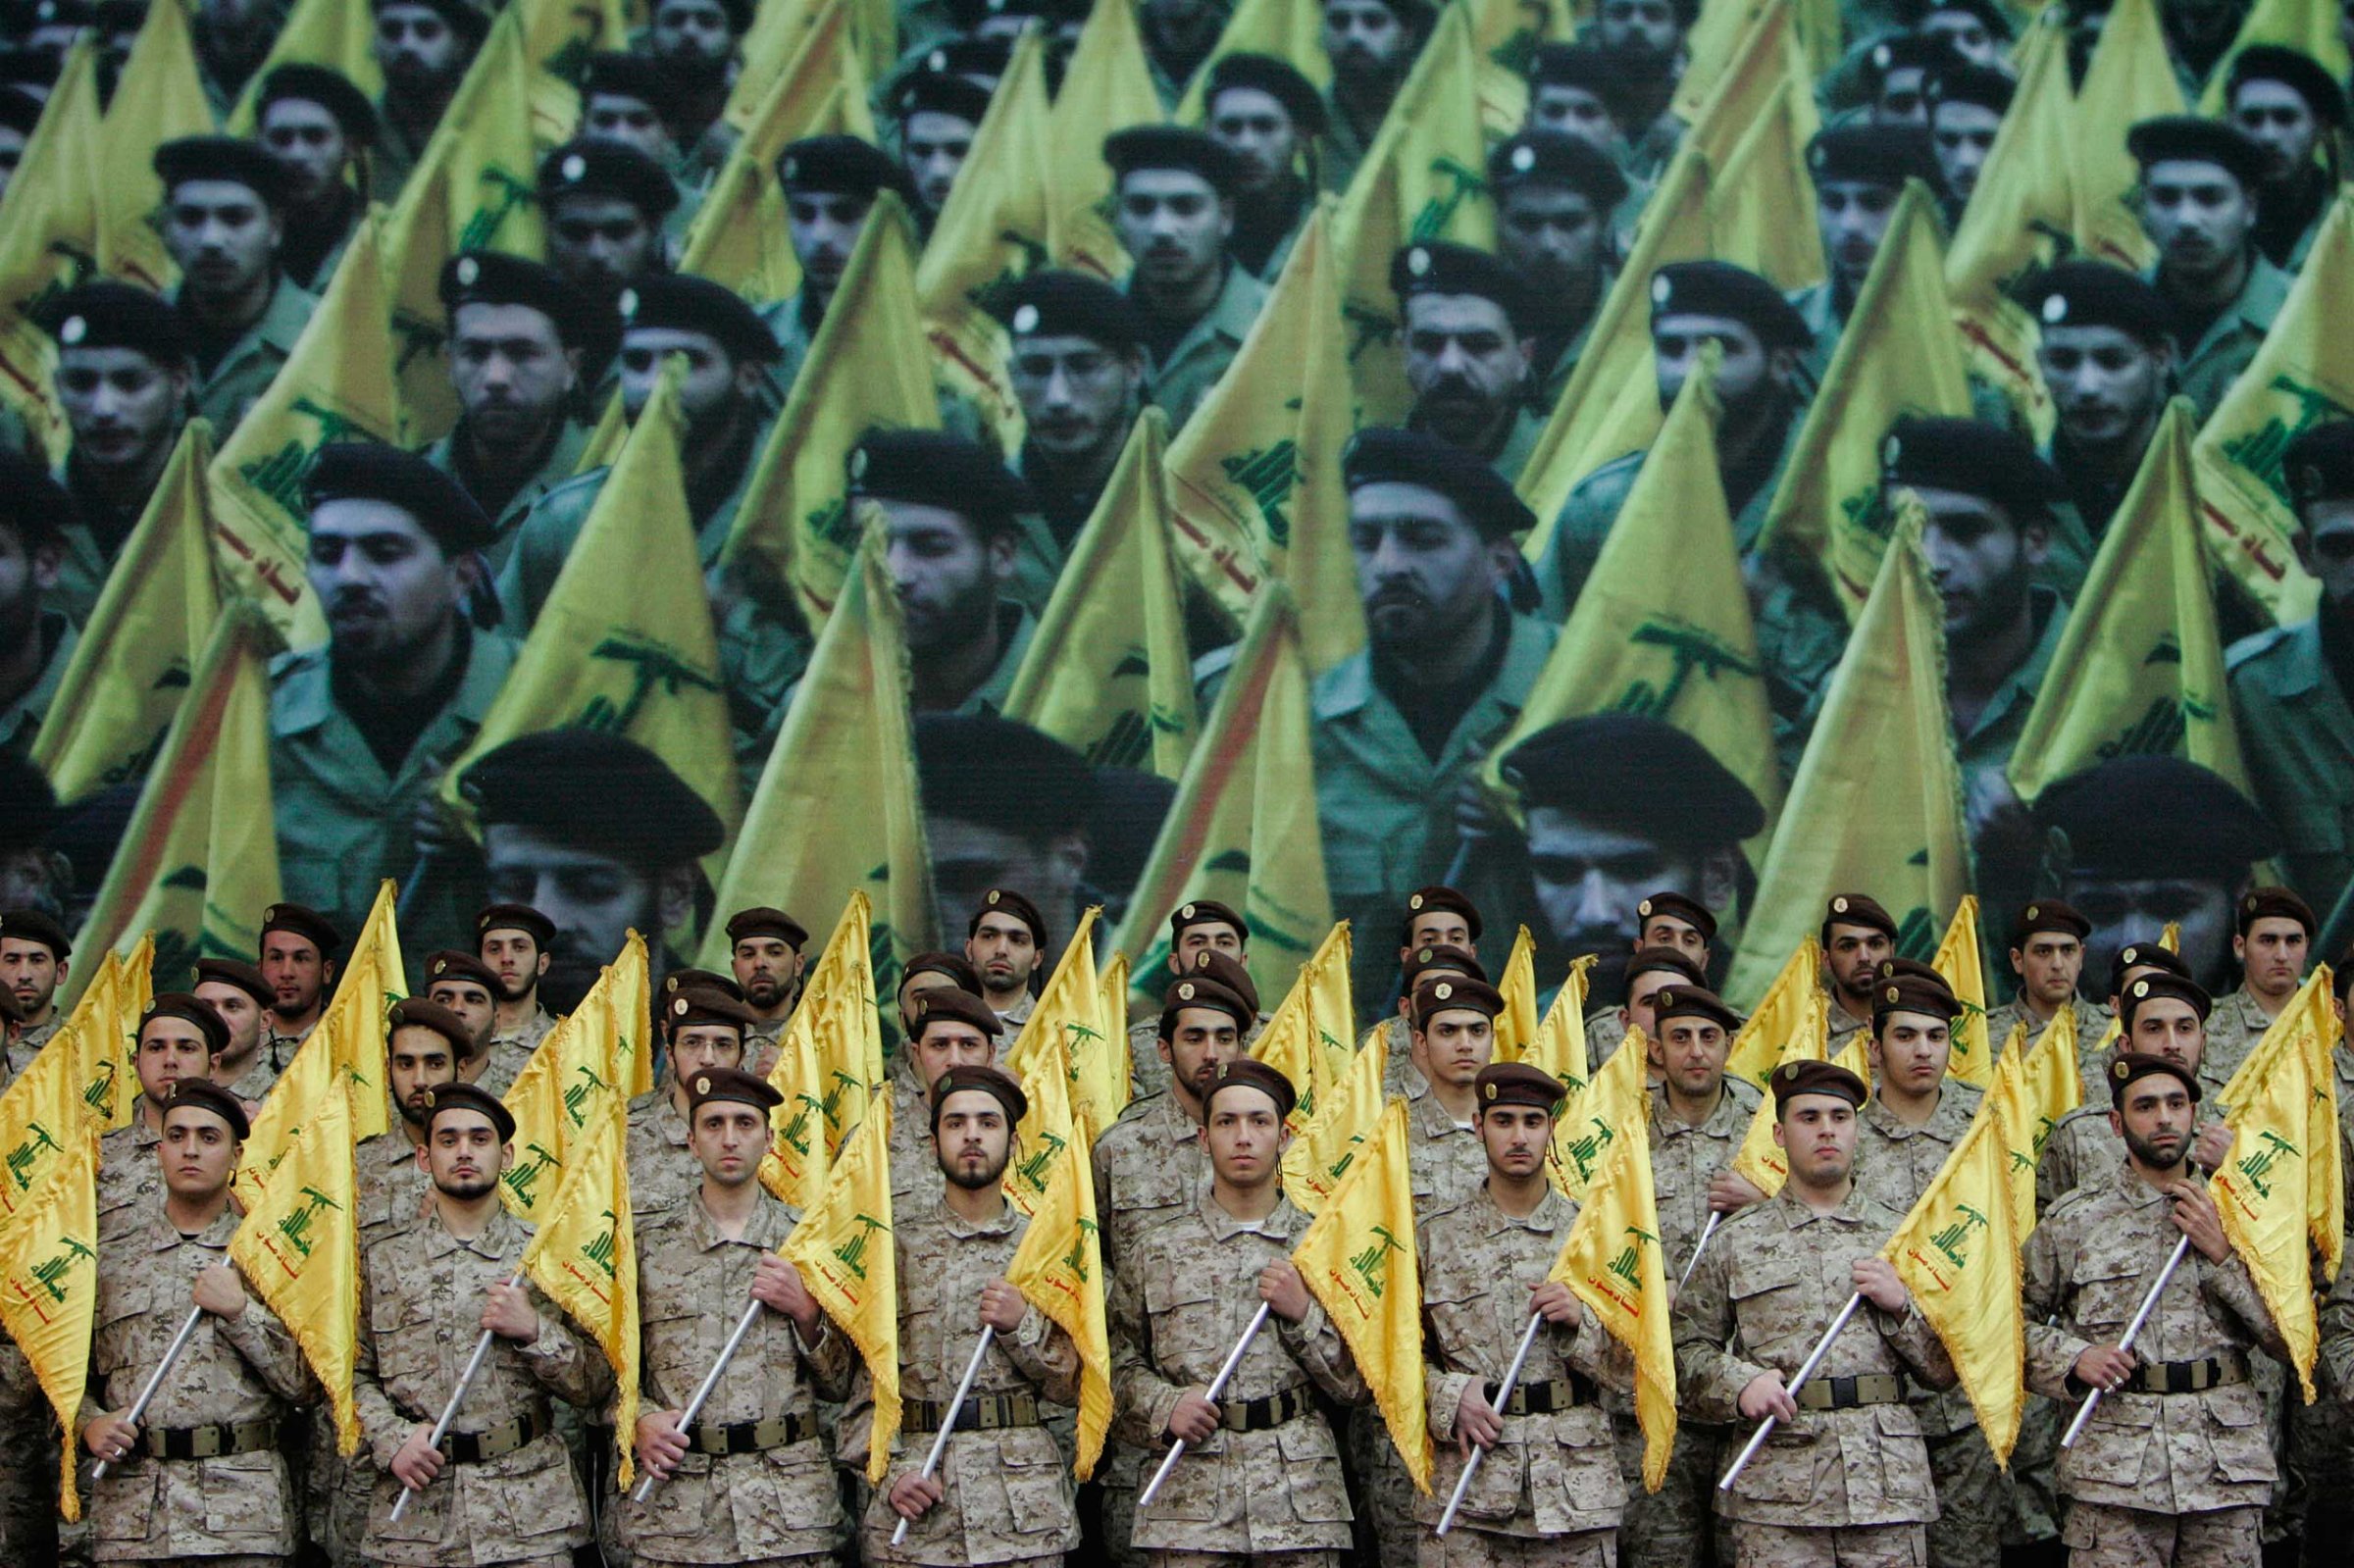 Hezbollah fighters hold their party flags as they attend a rally to commemorate slain top Hezbollah commander Imad Mughniyeh and two other leaders, Abbas Musawi and Ragheb Harb, in the Shiite suburb of Beirut, Feb. 22, 2008.